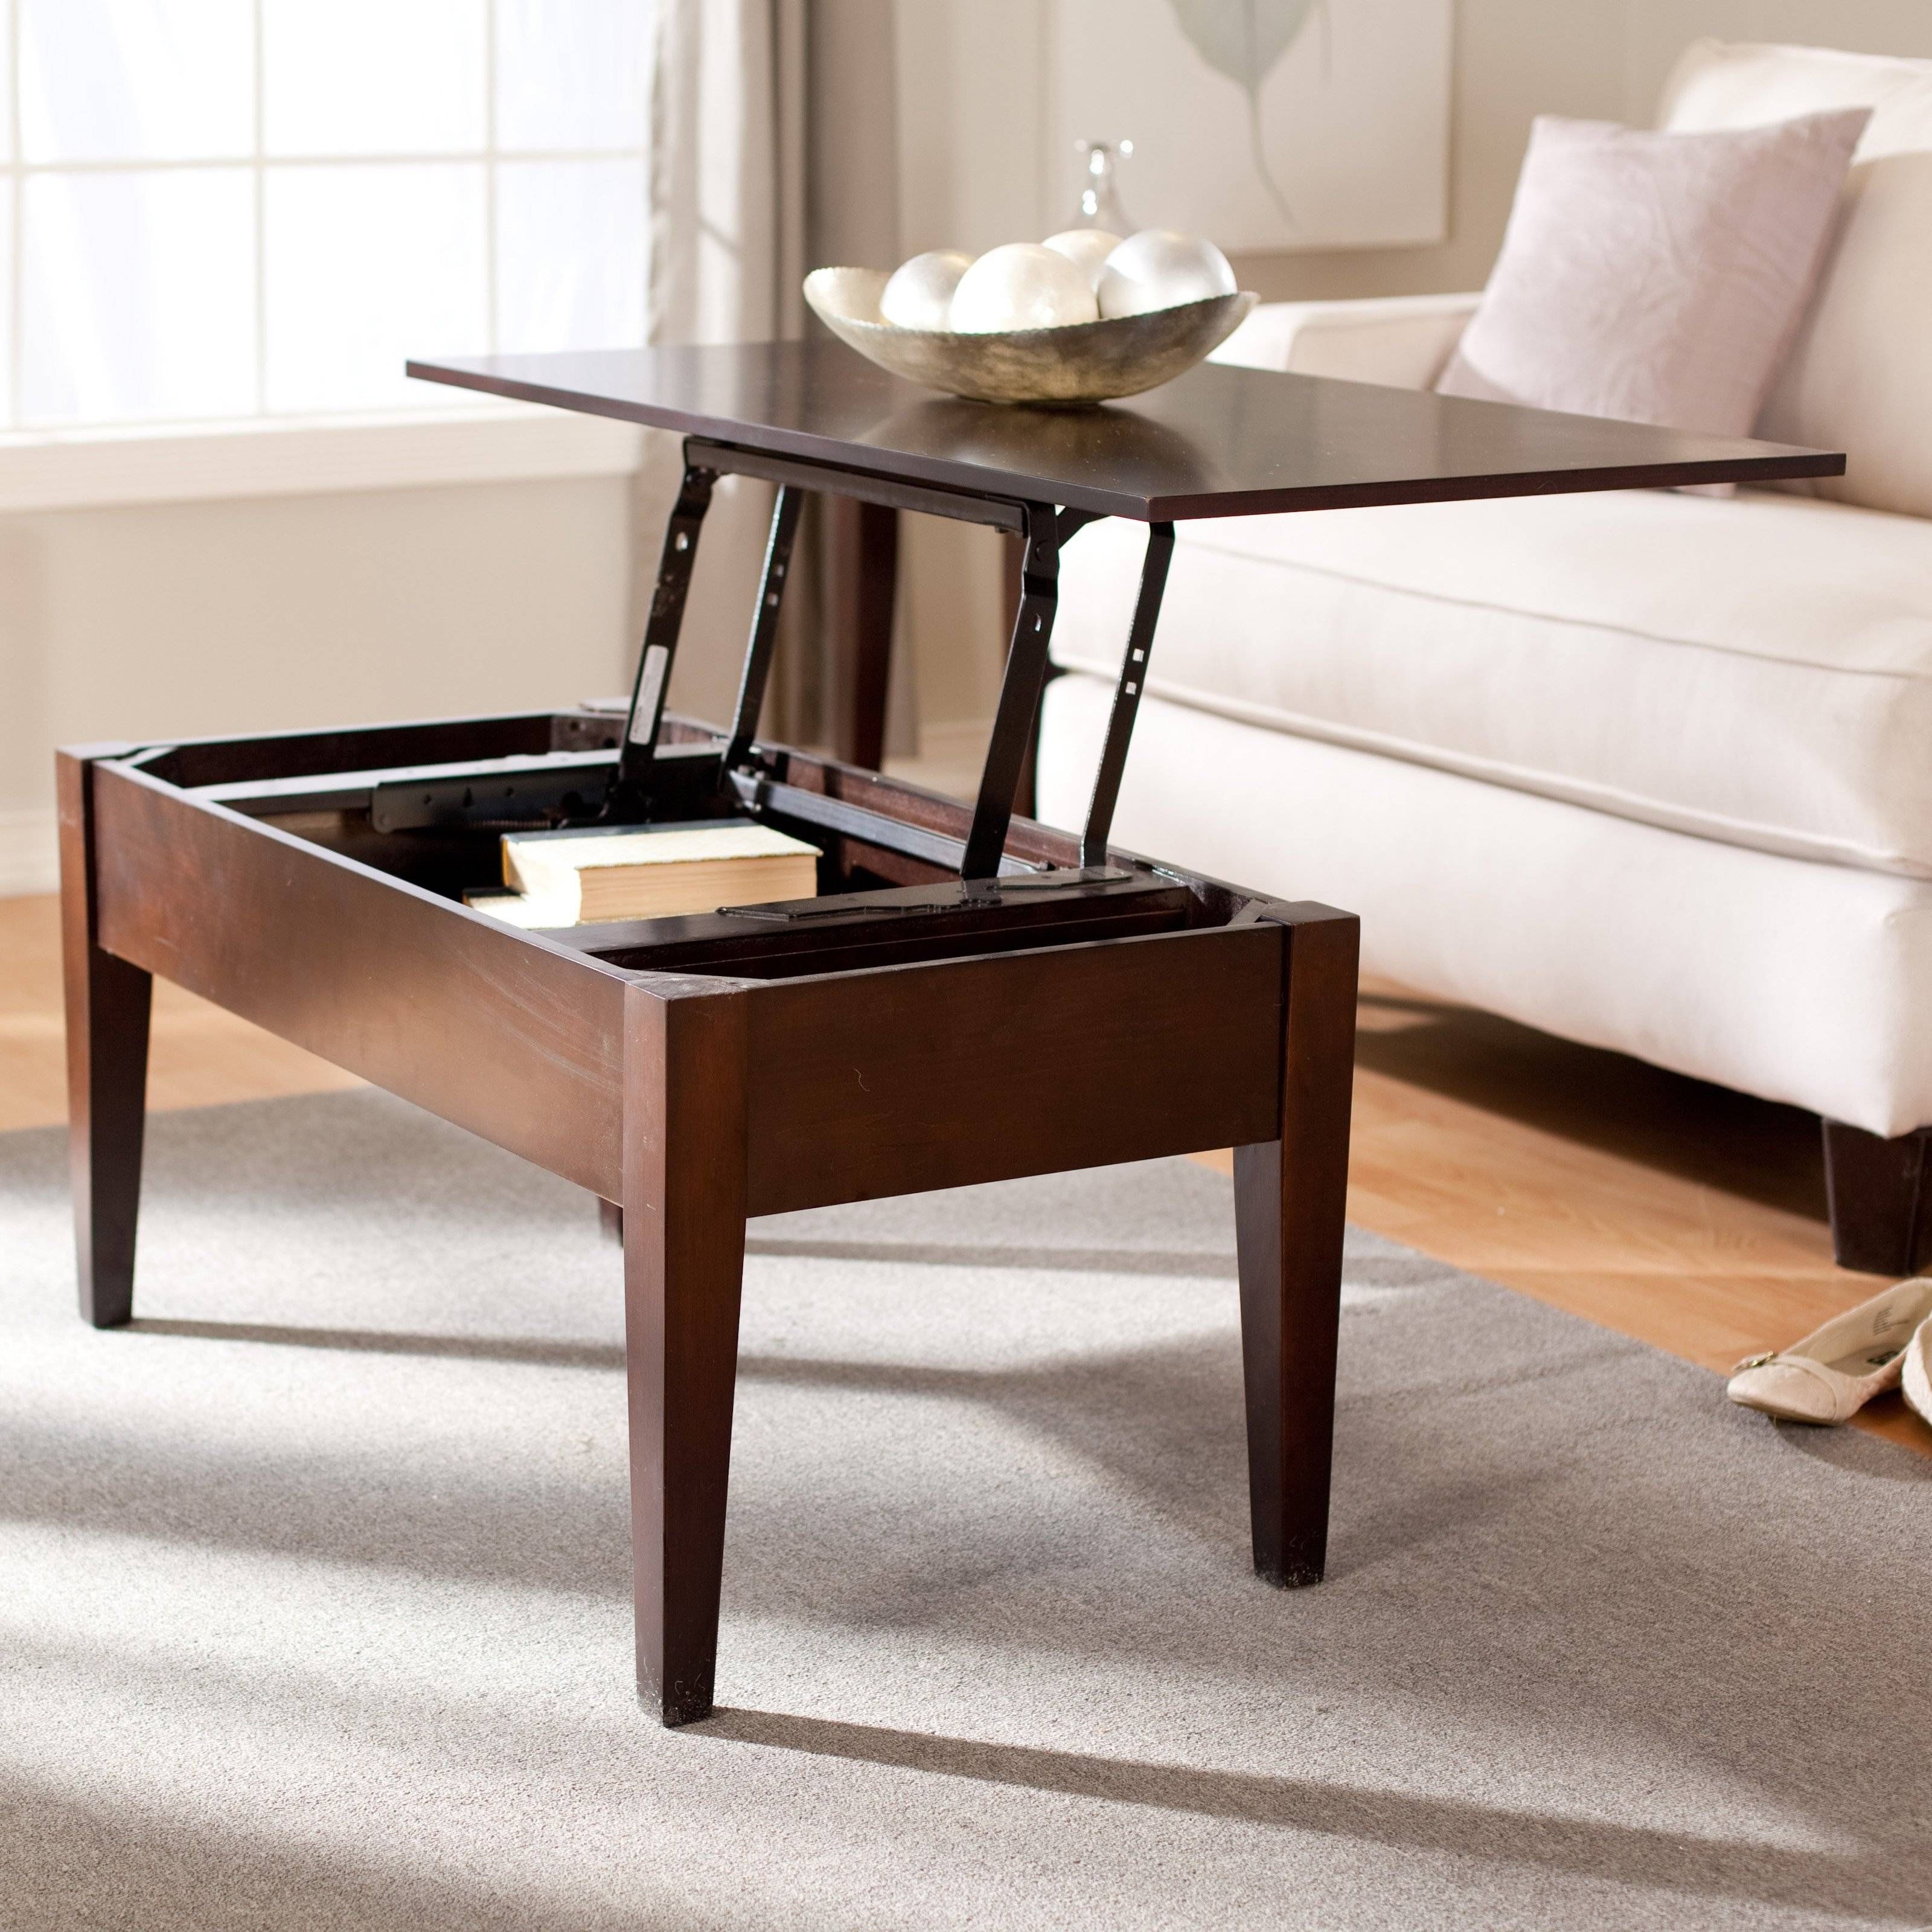 Turner Lift Top Coffee Table – Espresso | Hayneedle With Regard To Coffee Tables With Lift Up Top (View 3 of 30)